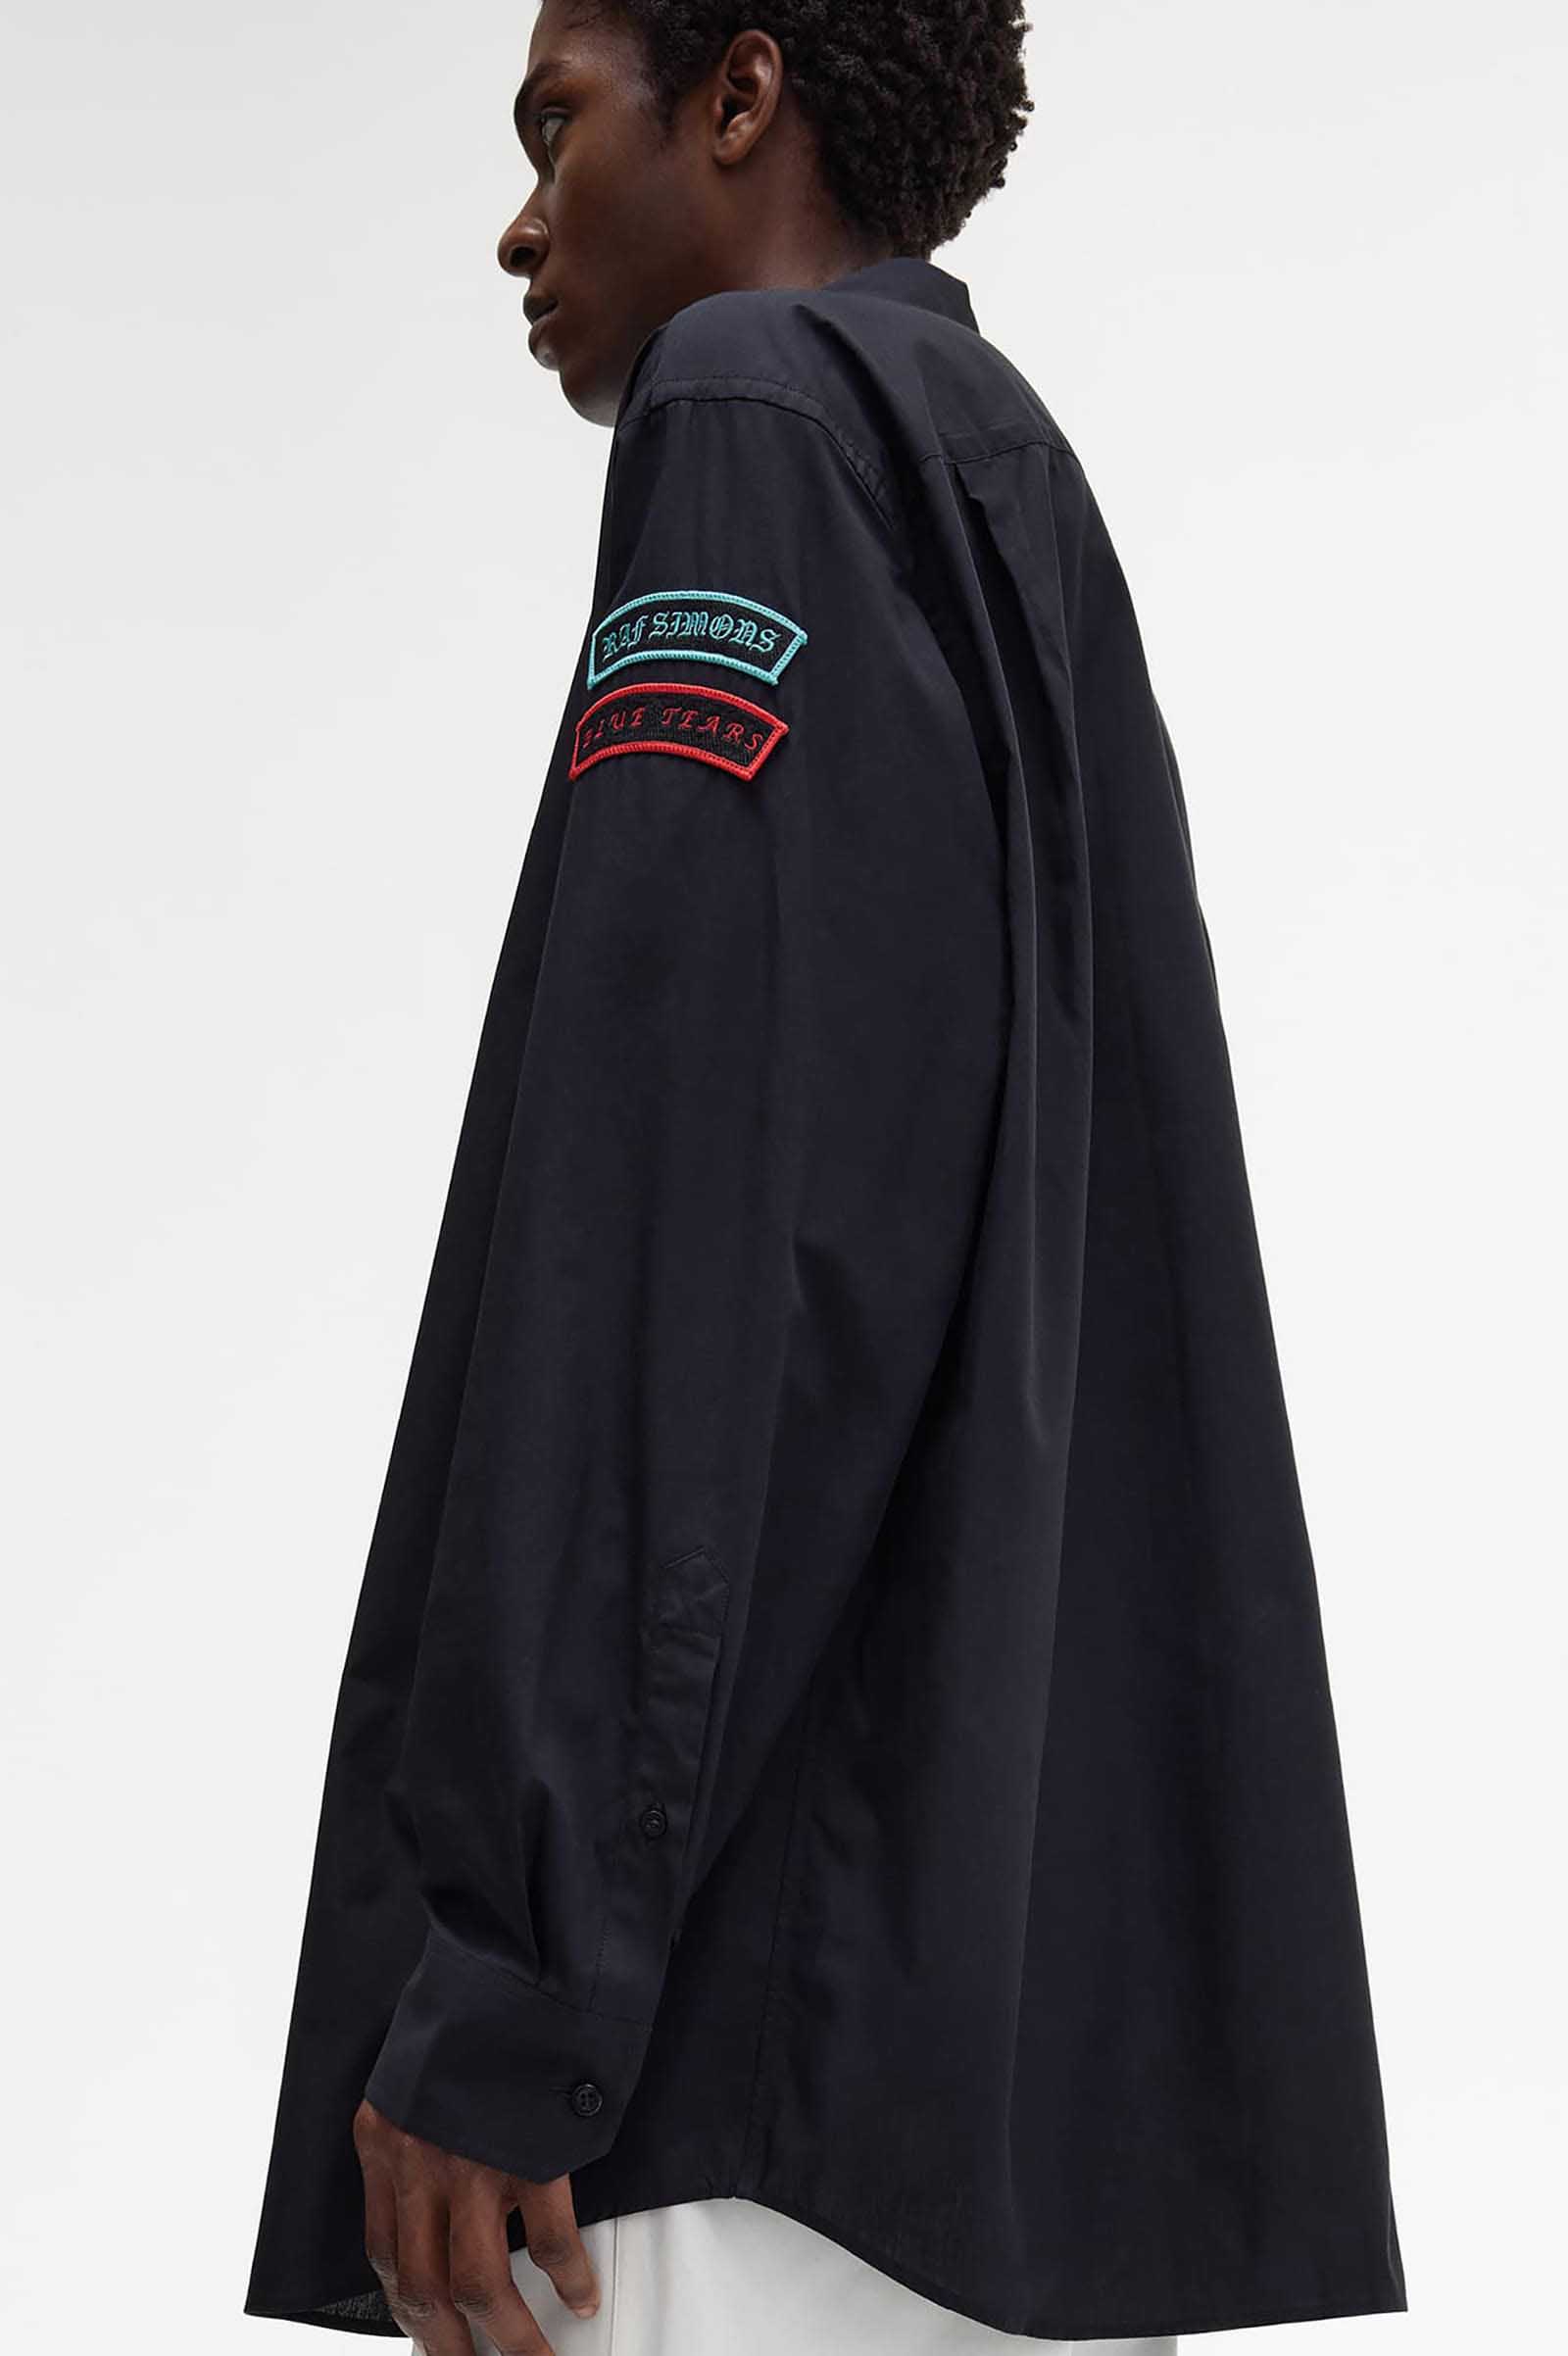 Raf Simons Patched Oversized Shirt(S 102：BLACK): FRED PERRY JAPAN  フレッドペリー日本公式サイト